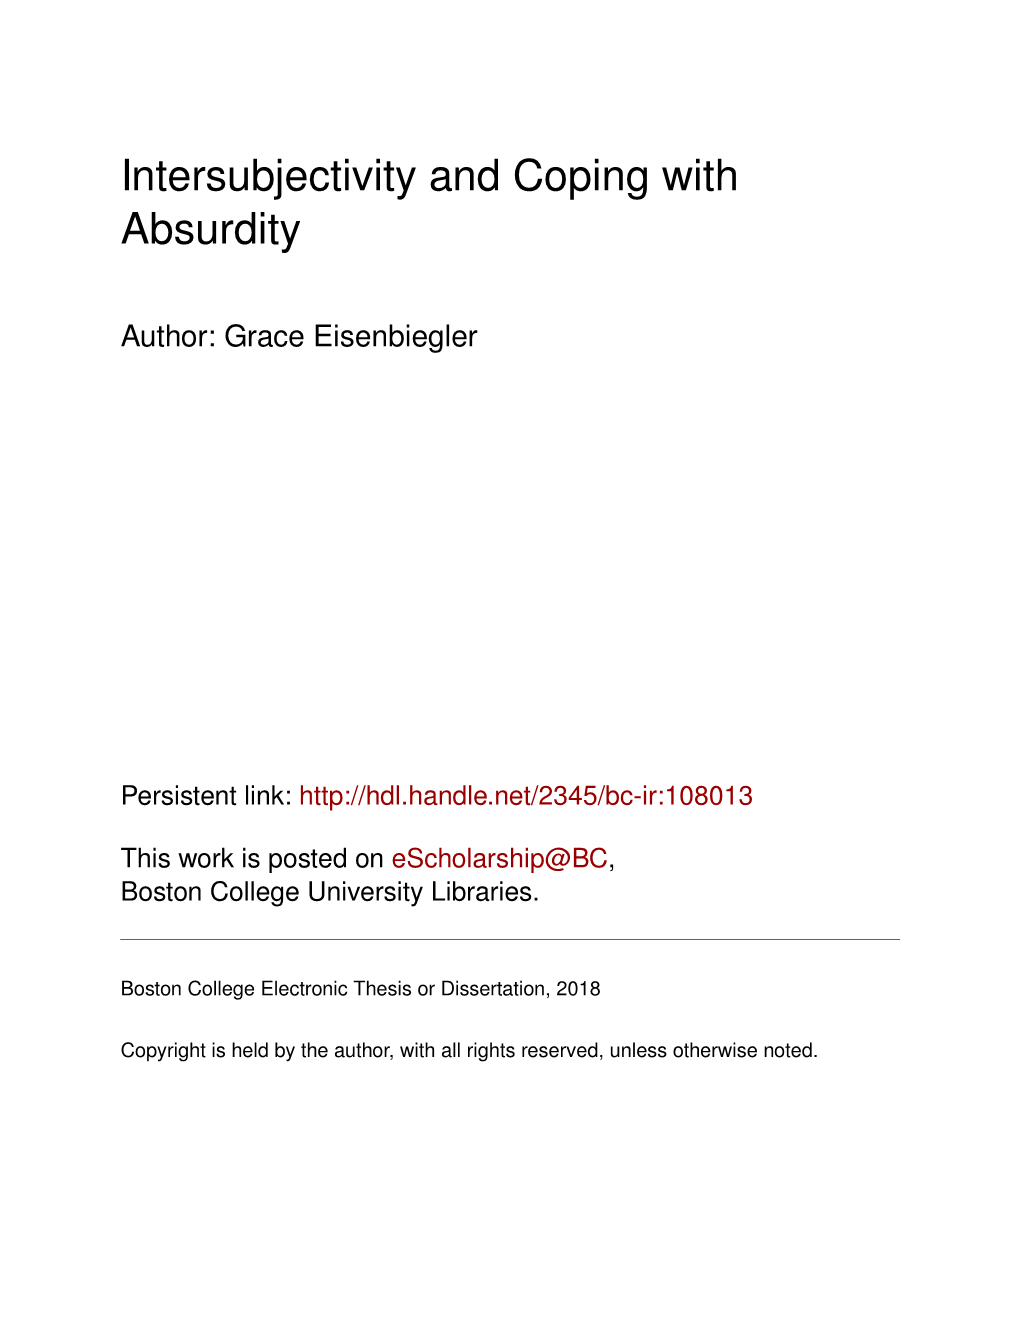 Intersubjectivity and Coping with Absurdity